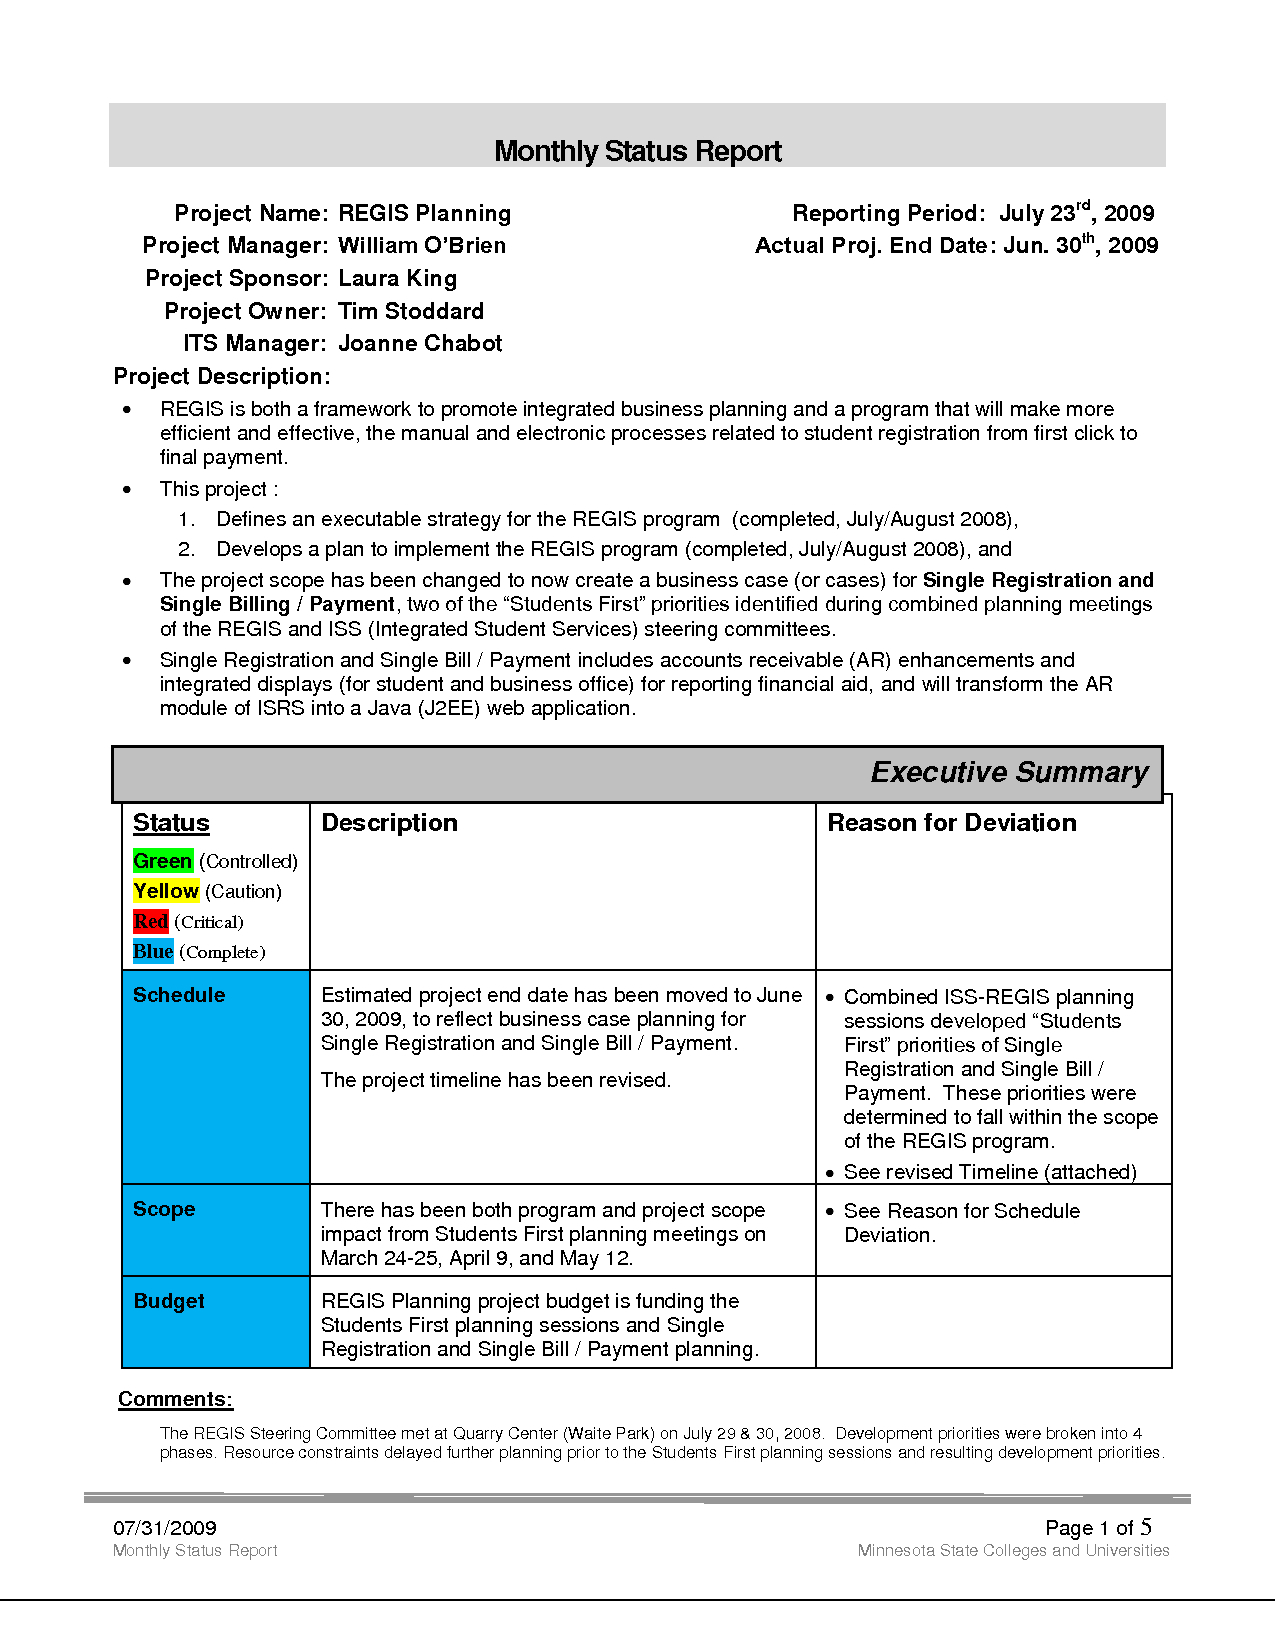 Research Project Report Template - Atlantaauctionco For Research Project Report Template